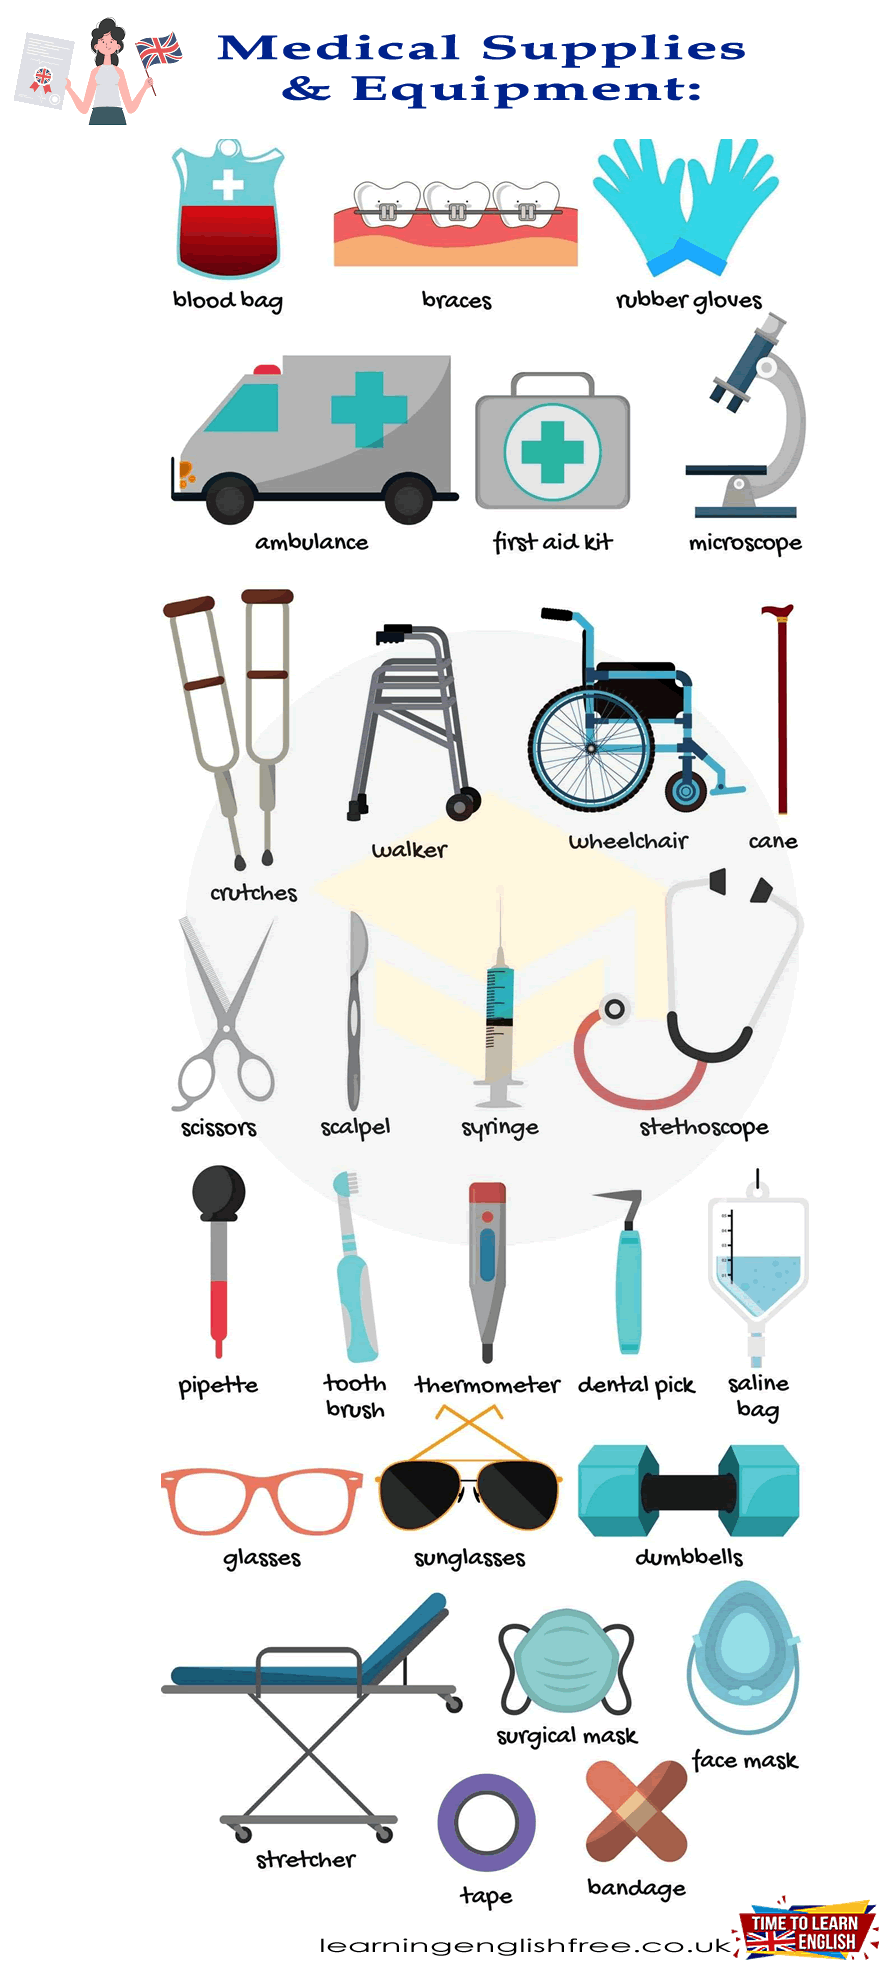 A comprehensive English lesson on medical supplies and equipment, detailing their uses with practical examples.